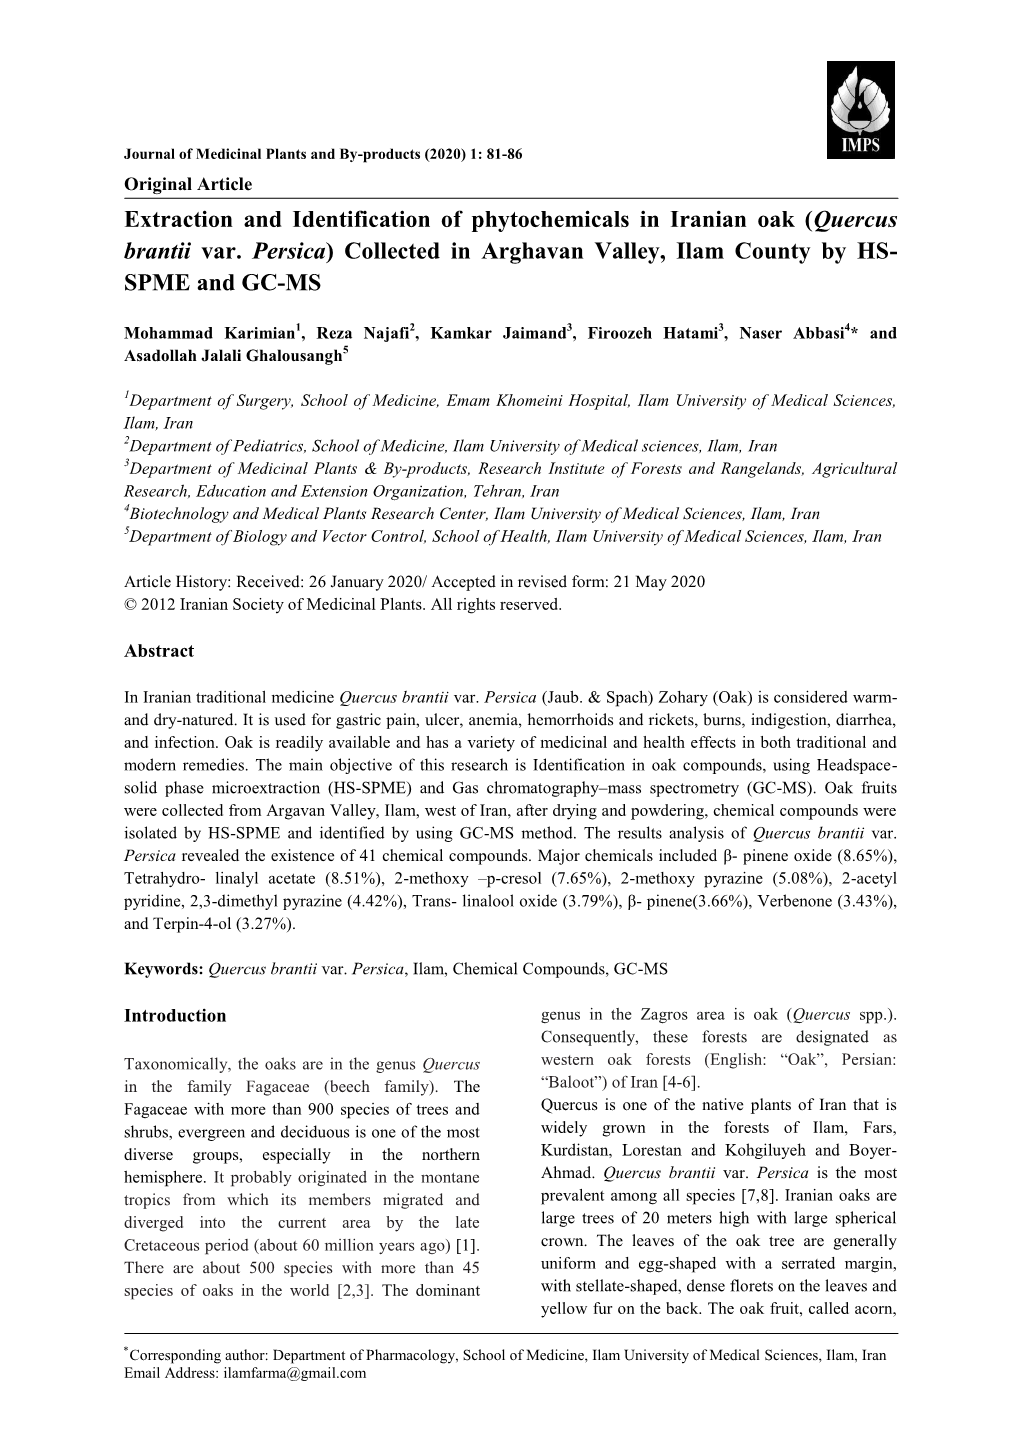 Extraction and Identification of Phytochemicals in Iranian Oak (Quercus Brantii Var. Persica) Collected in Arghavan Valley, Ilam County by HS- SPME and GC-MS